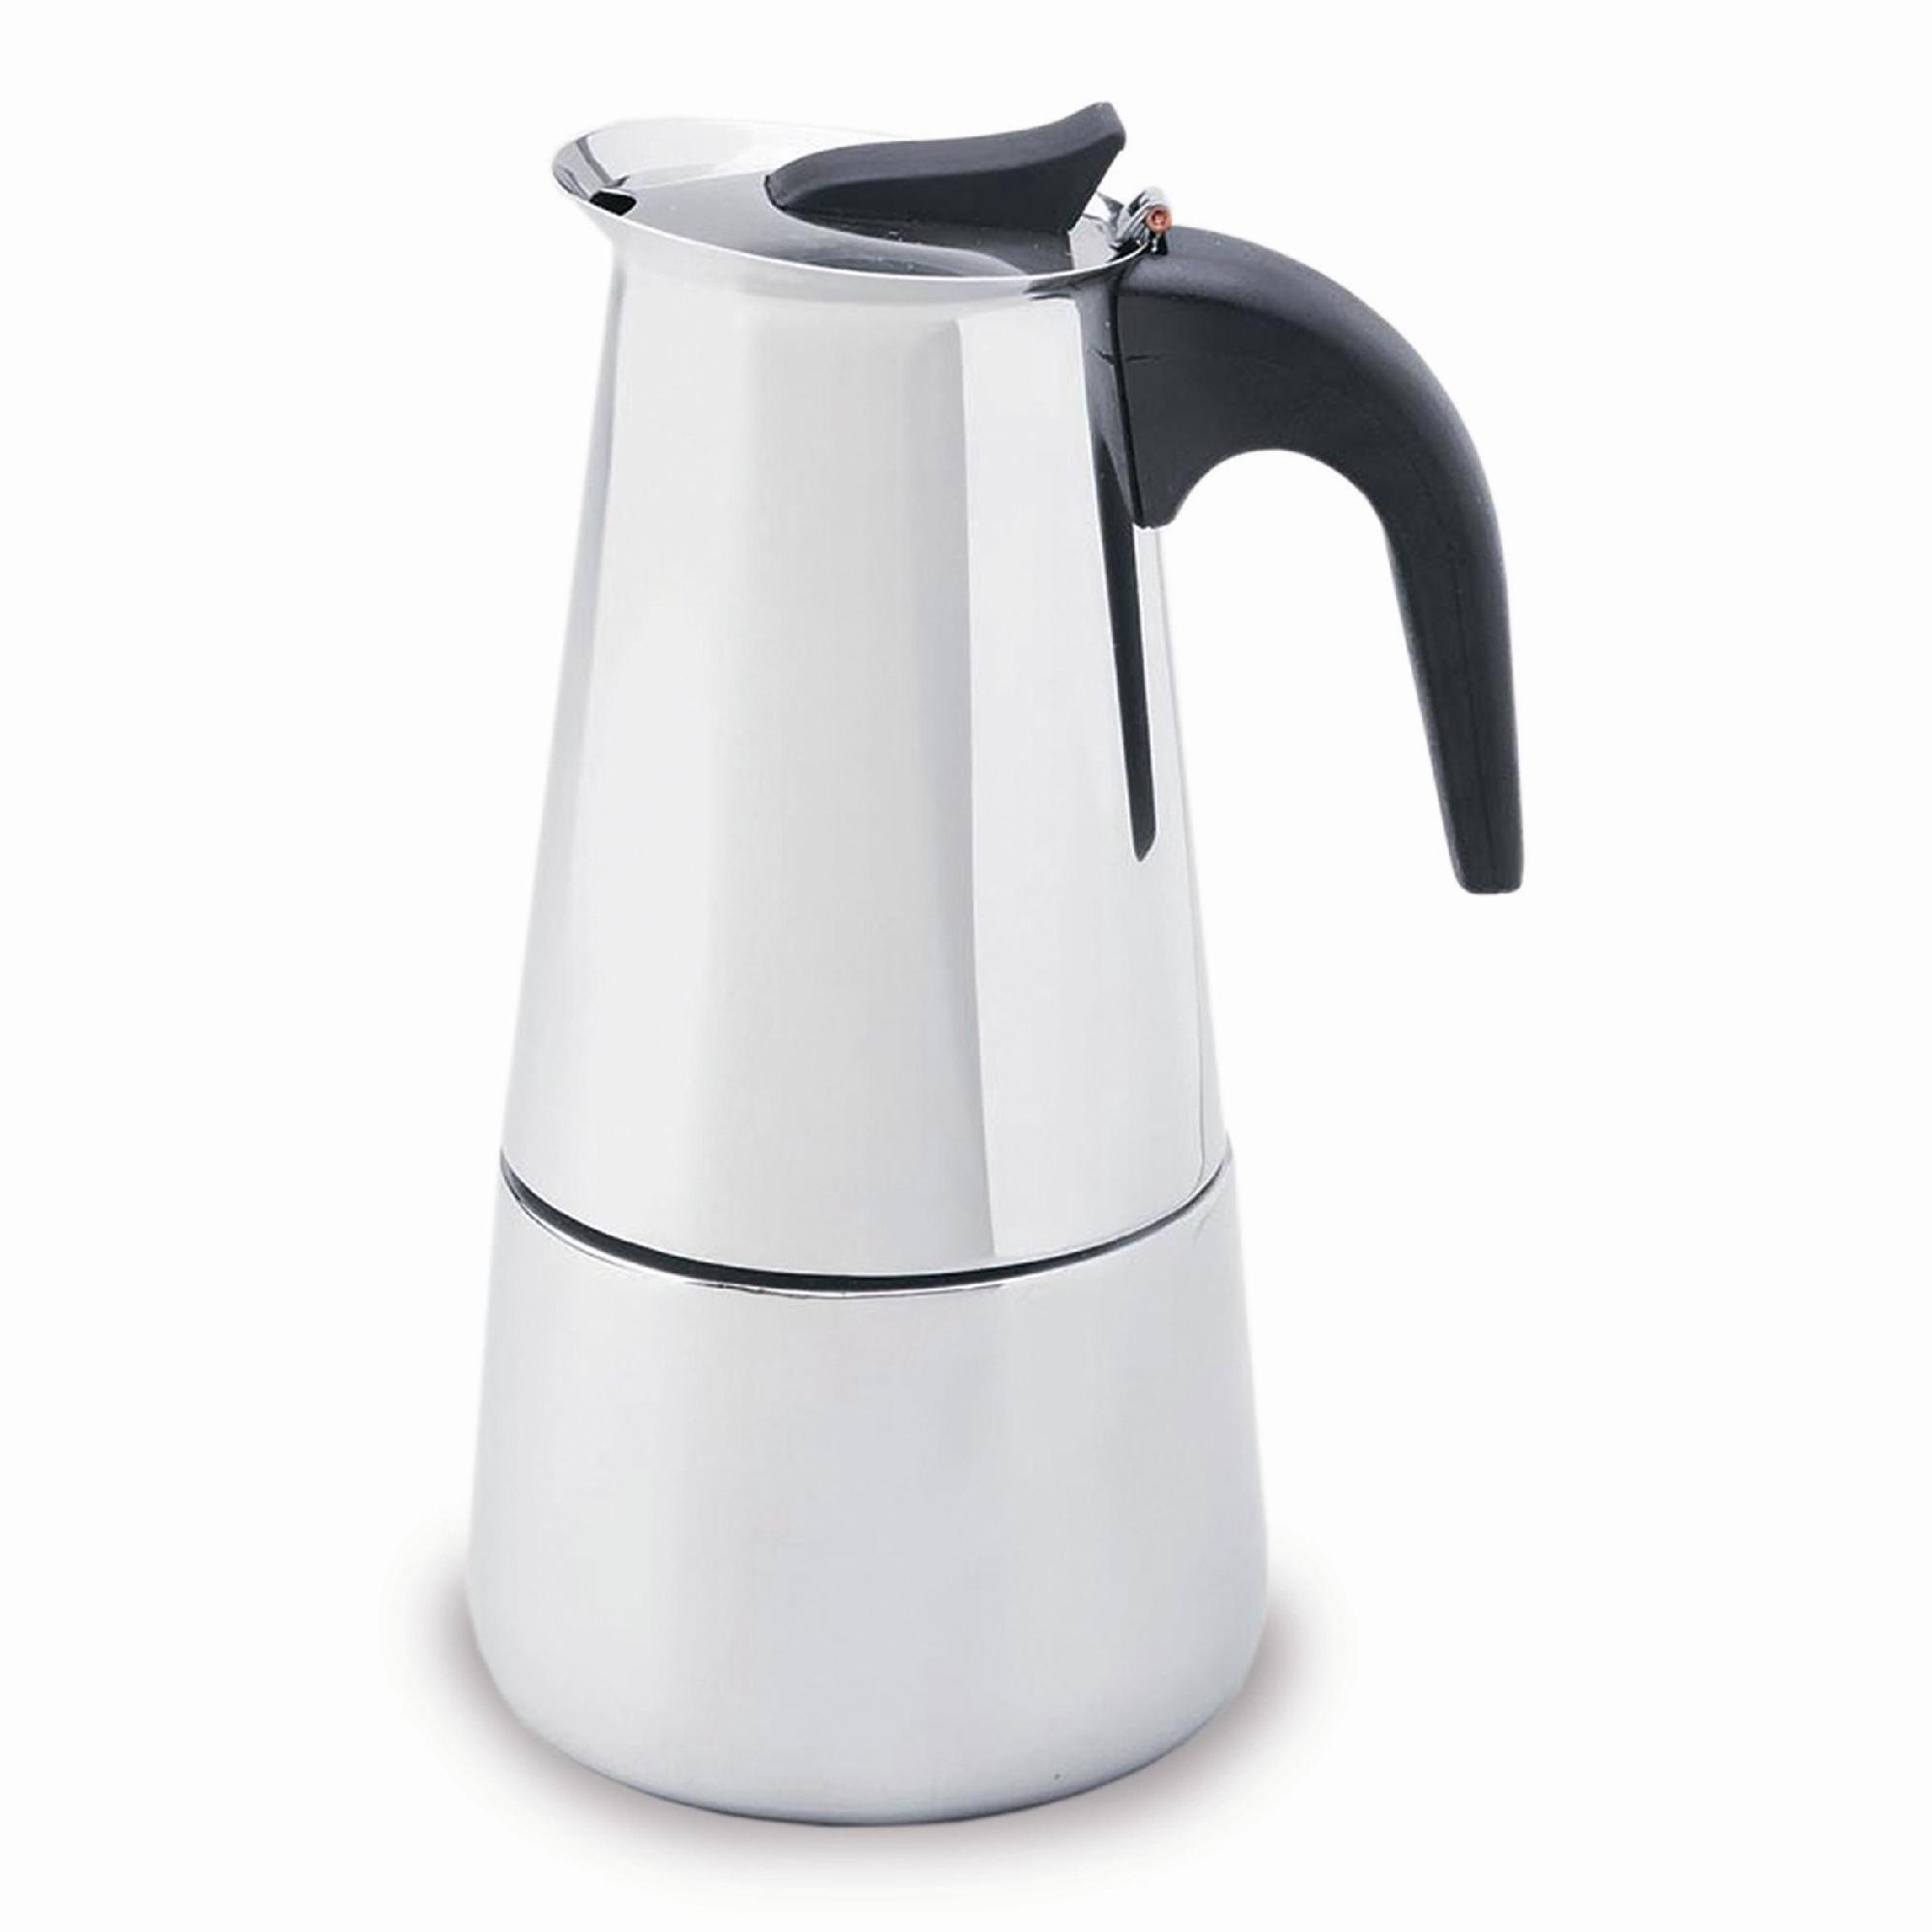 Imusa Stainless Steel Four-Cup Coffee Maker